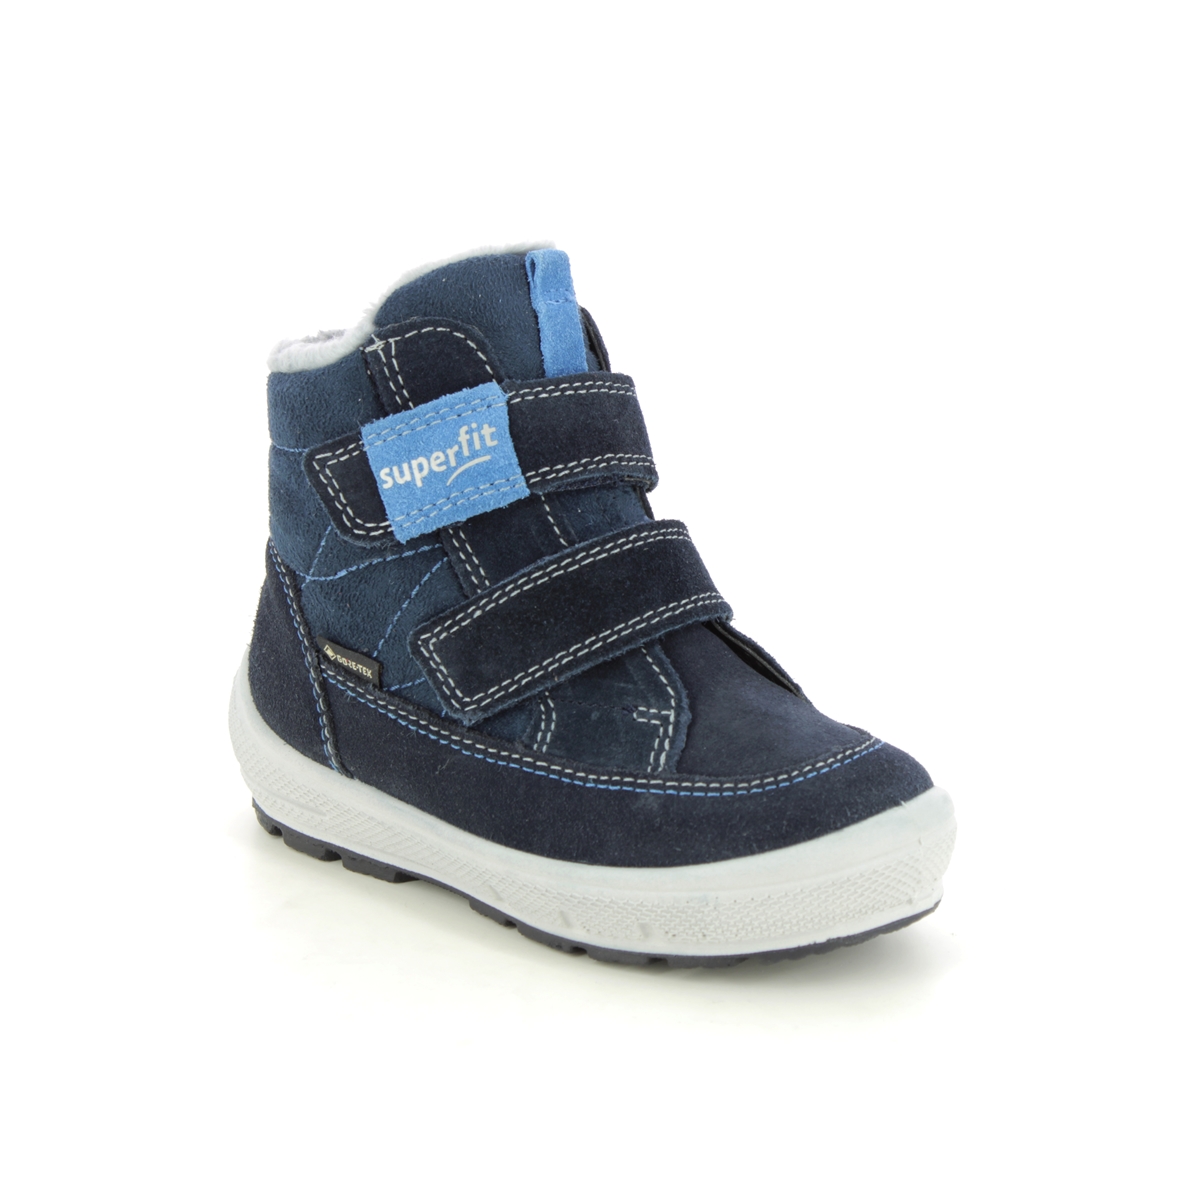 Superfit Groovy Gtx Navy Kids Toddler Boys Boots 1009314-8000 In Size 21 In Plain Navy